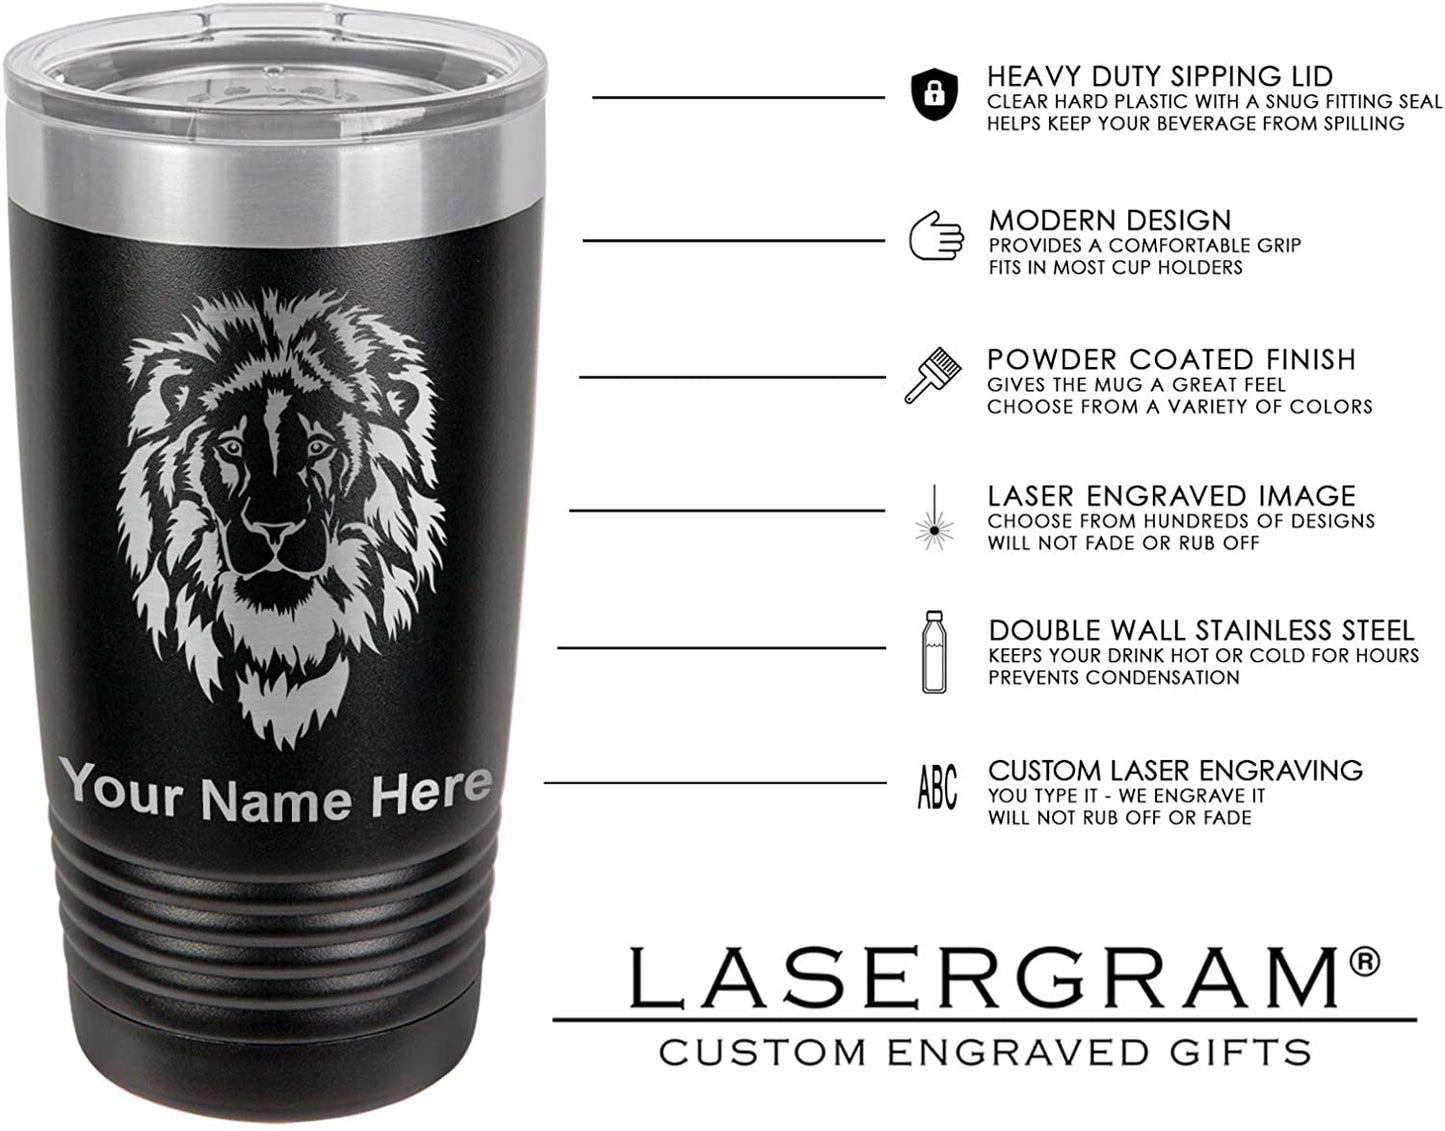 20oz Vacuum Insulated Tumbler Mug, Fireman with Hose, Personalized Engraving Included